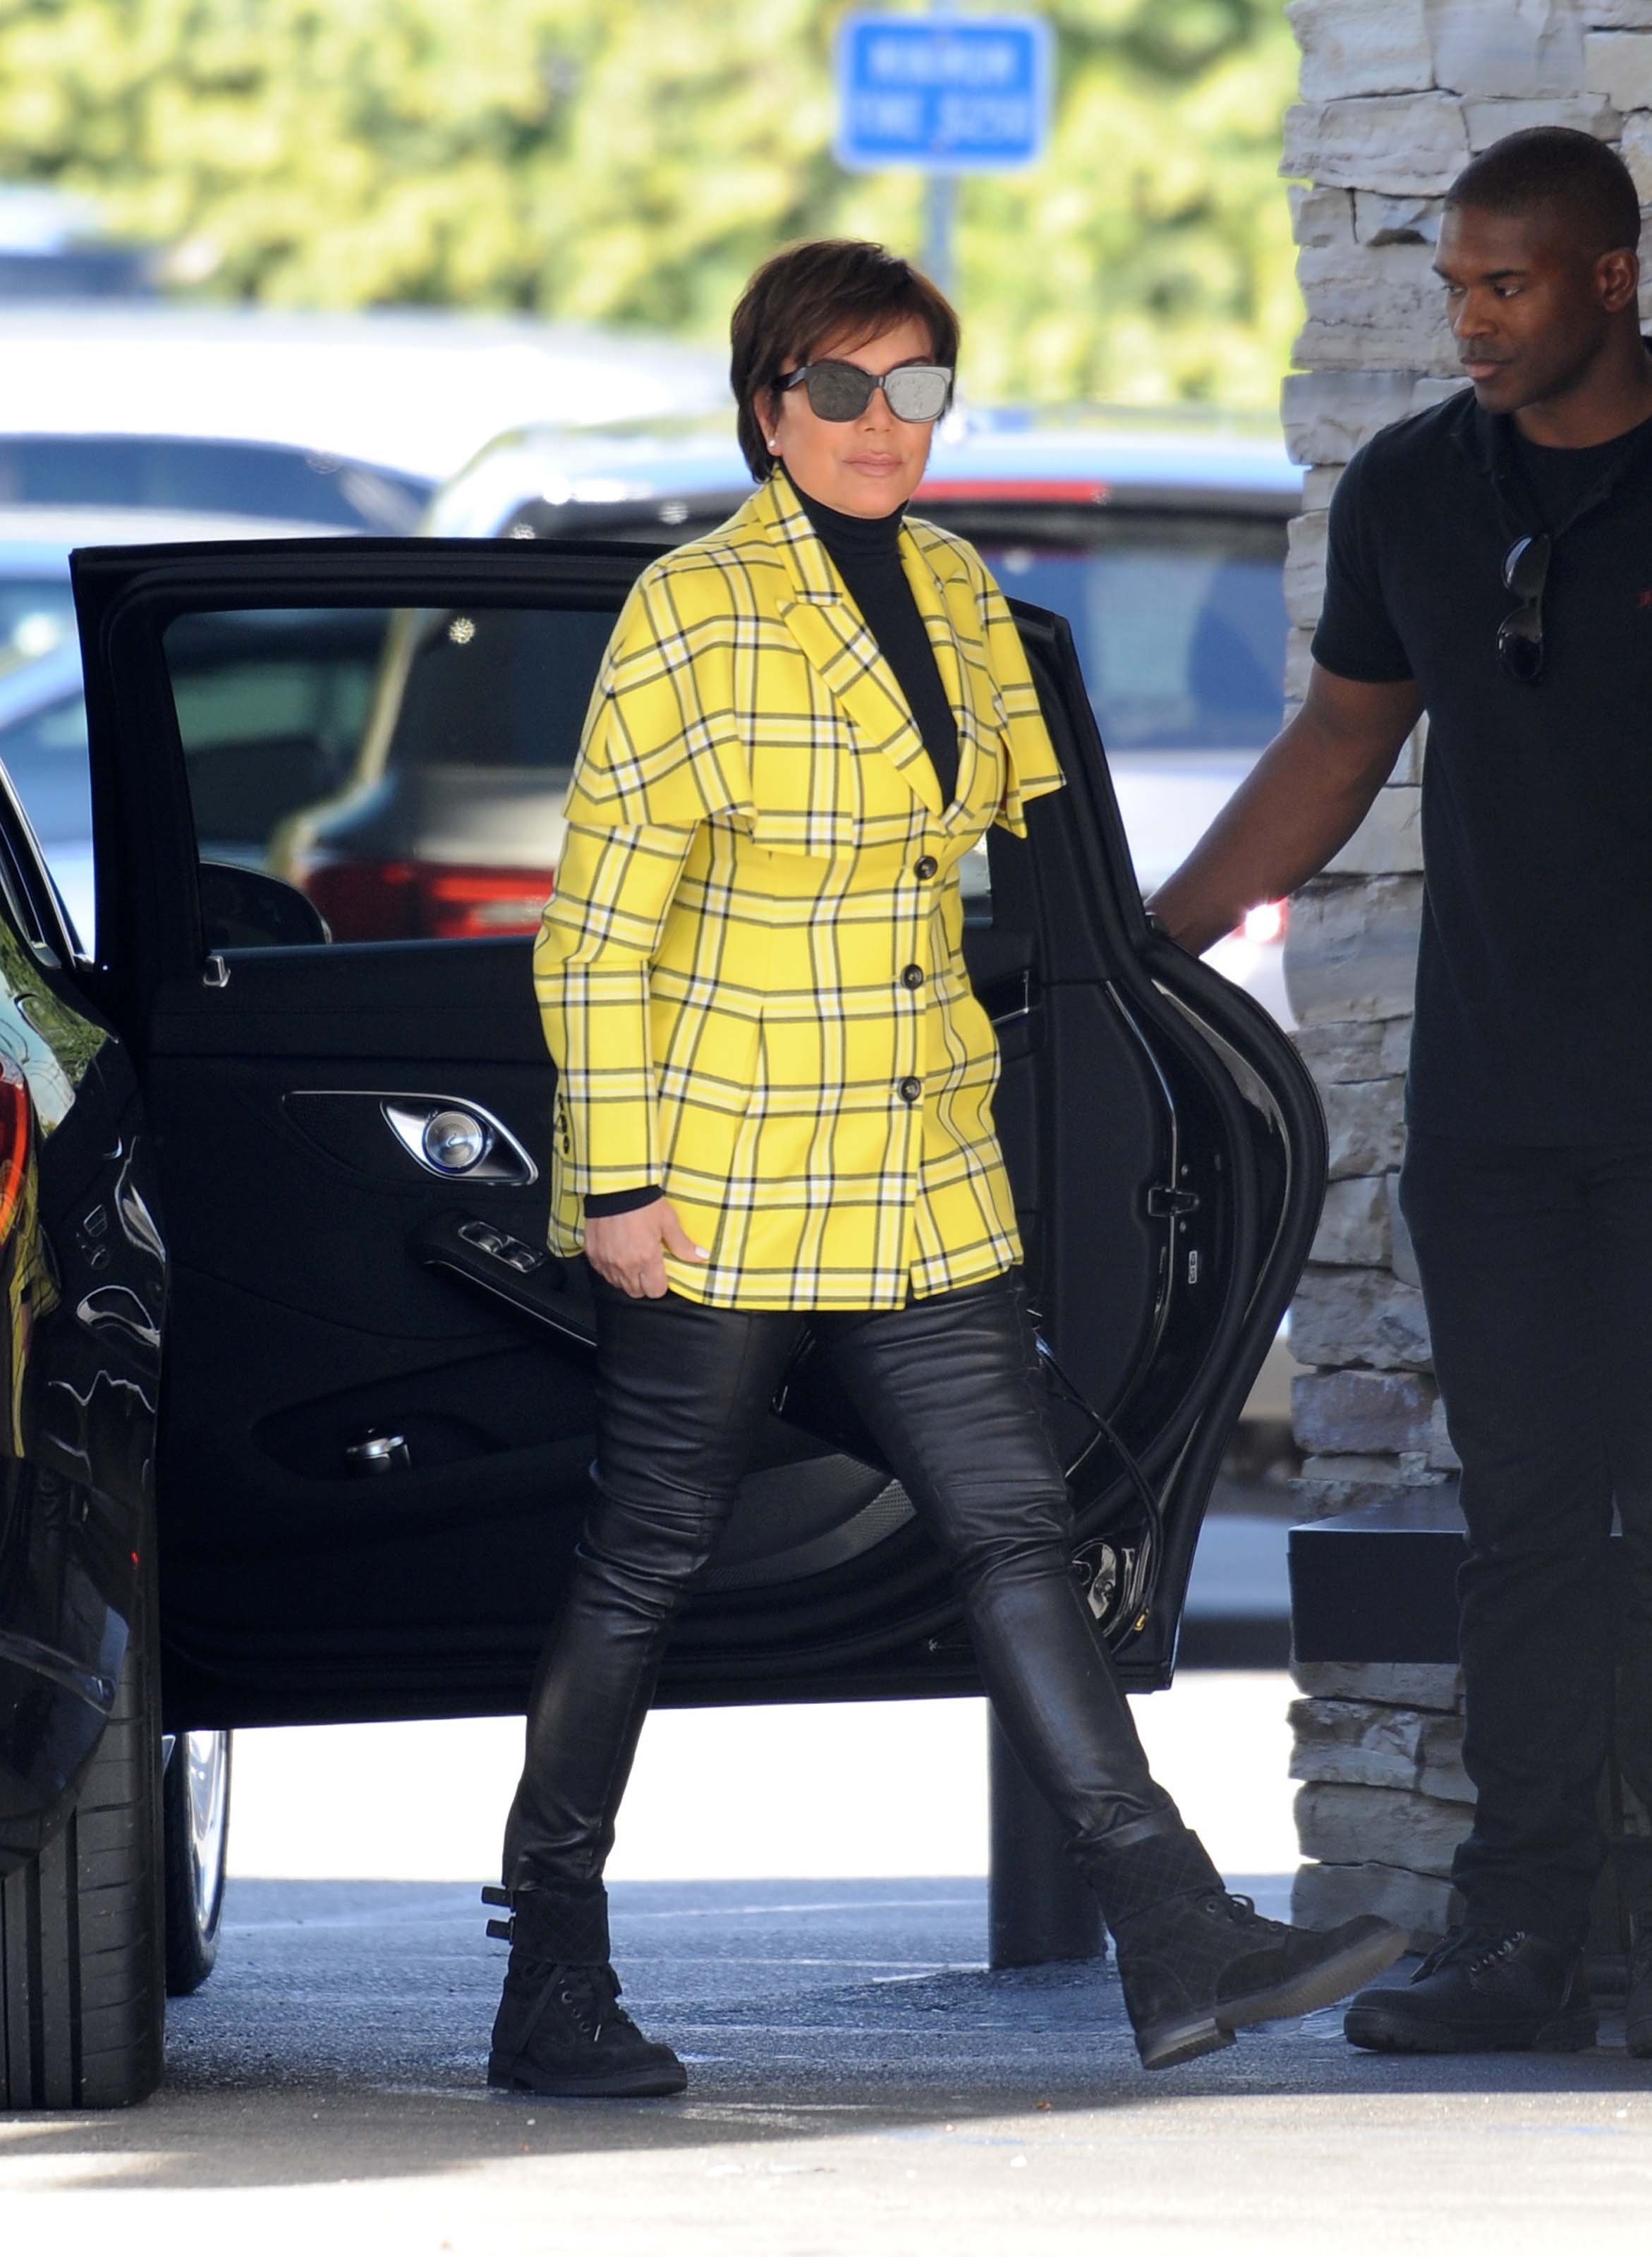 Kris Jenner arriving for the Keeping Up With The Kardashians